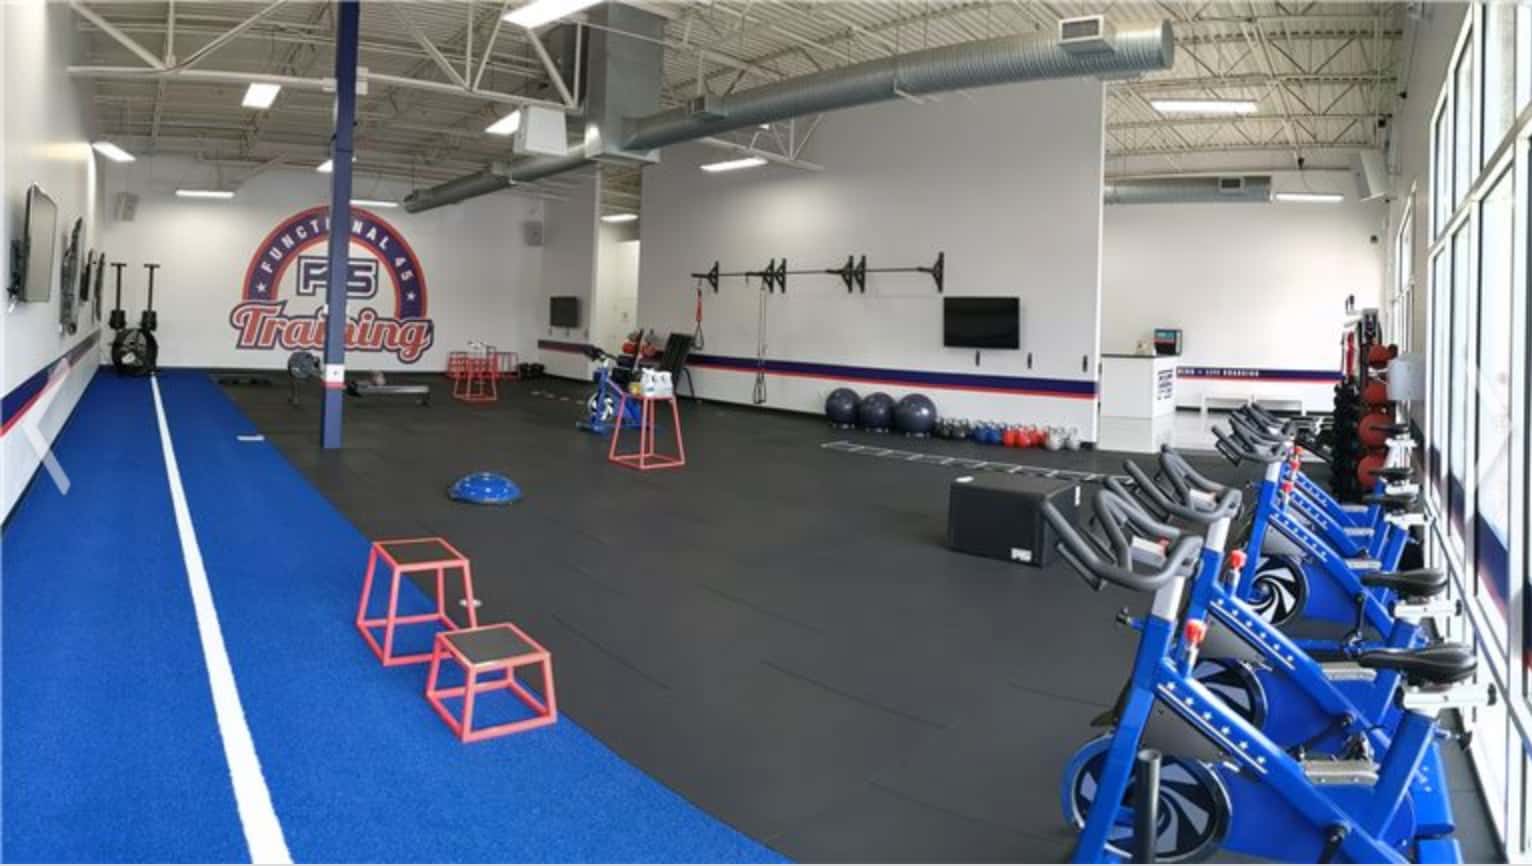 Inside an F45 franchise location